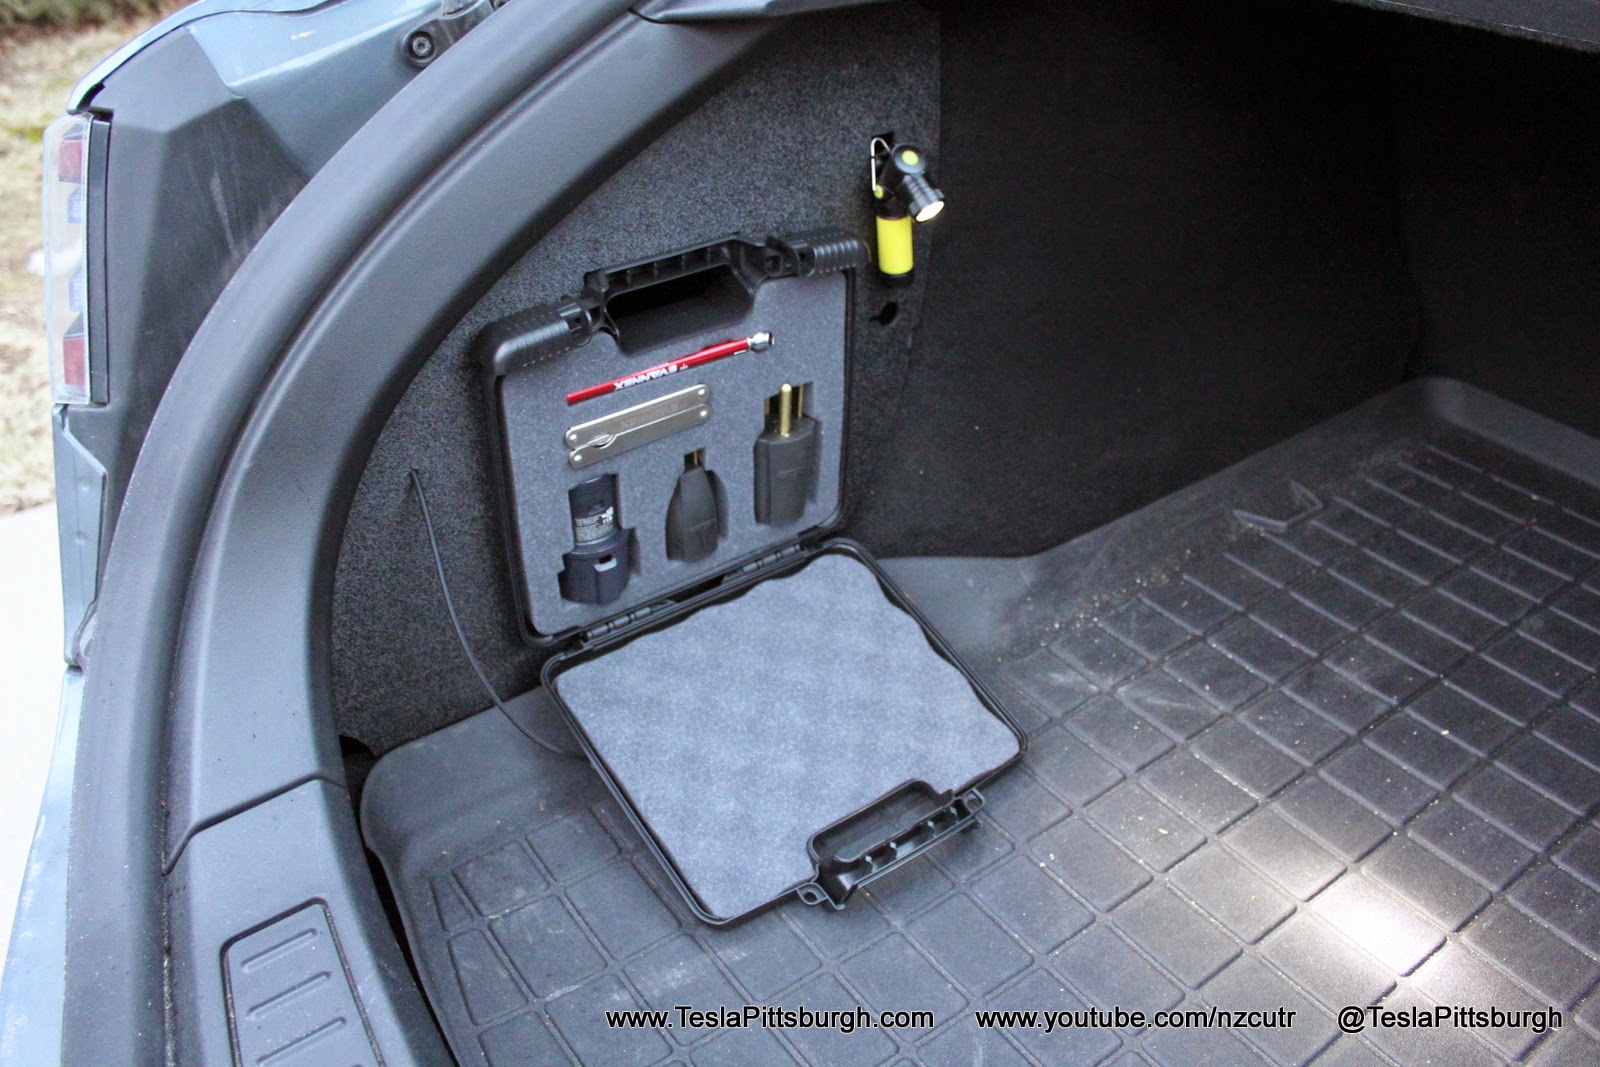 Model-S-Charge-Adapter-Lighting-Case-1